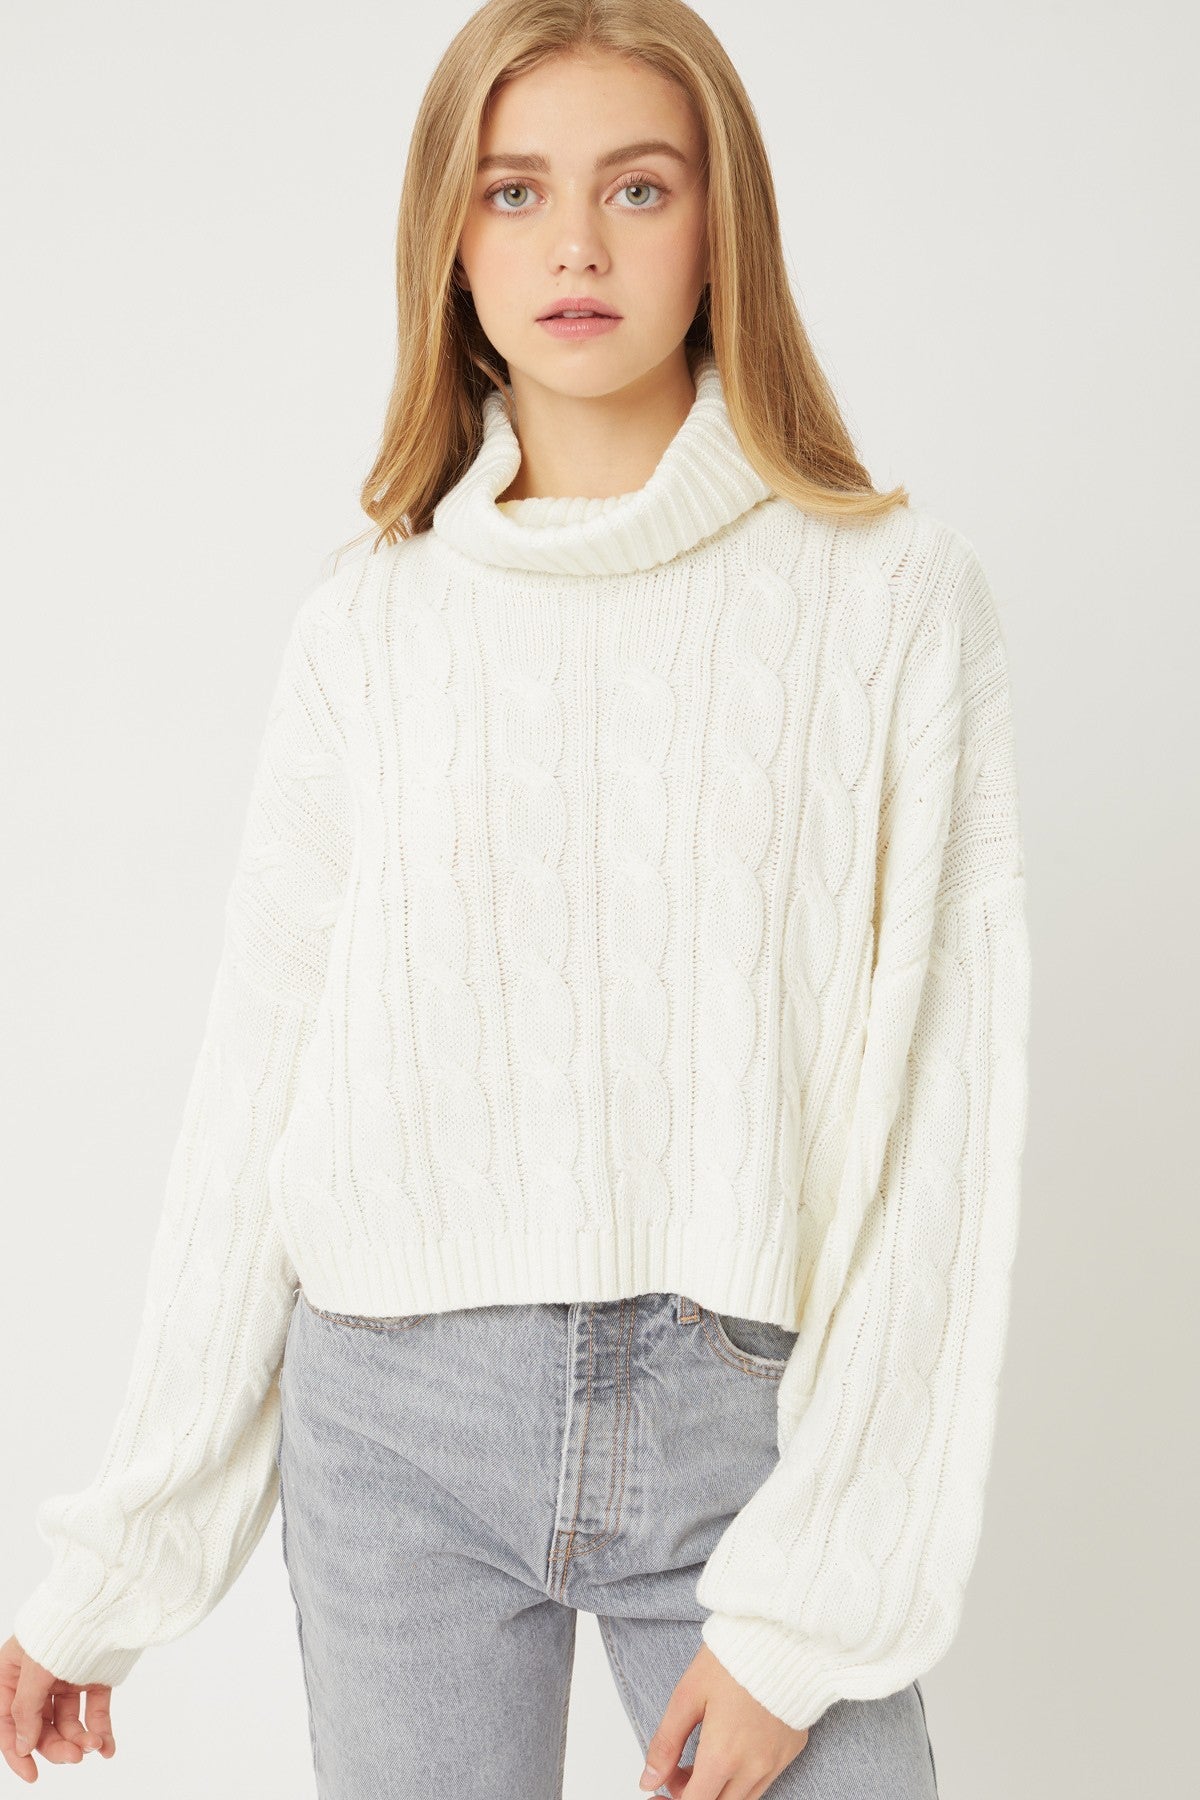 Turtle Neck Loose Fit Cable Knit Sweater Turtle Neck Loose Fit Cable Knit Sweater - M&R CORNER M&R CORNER